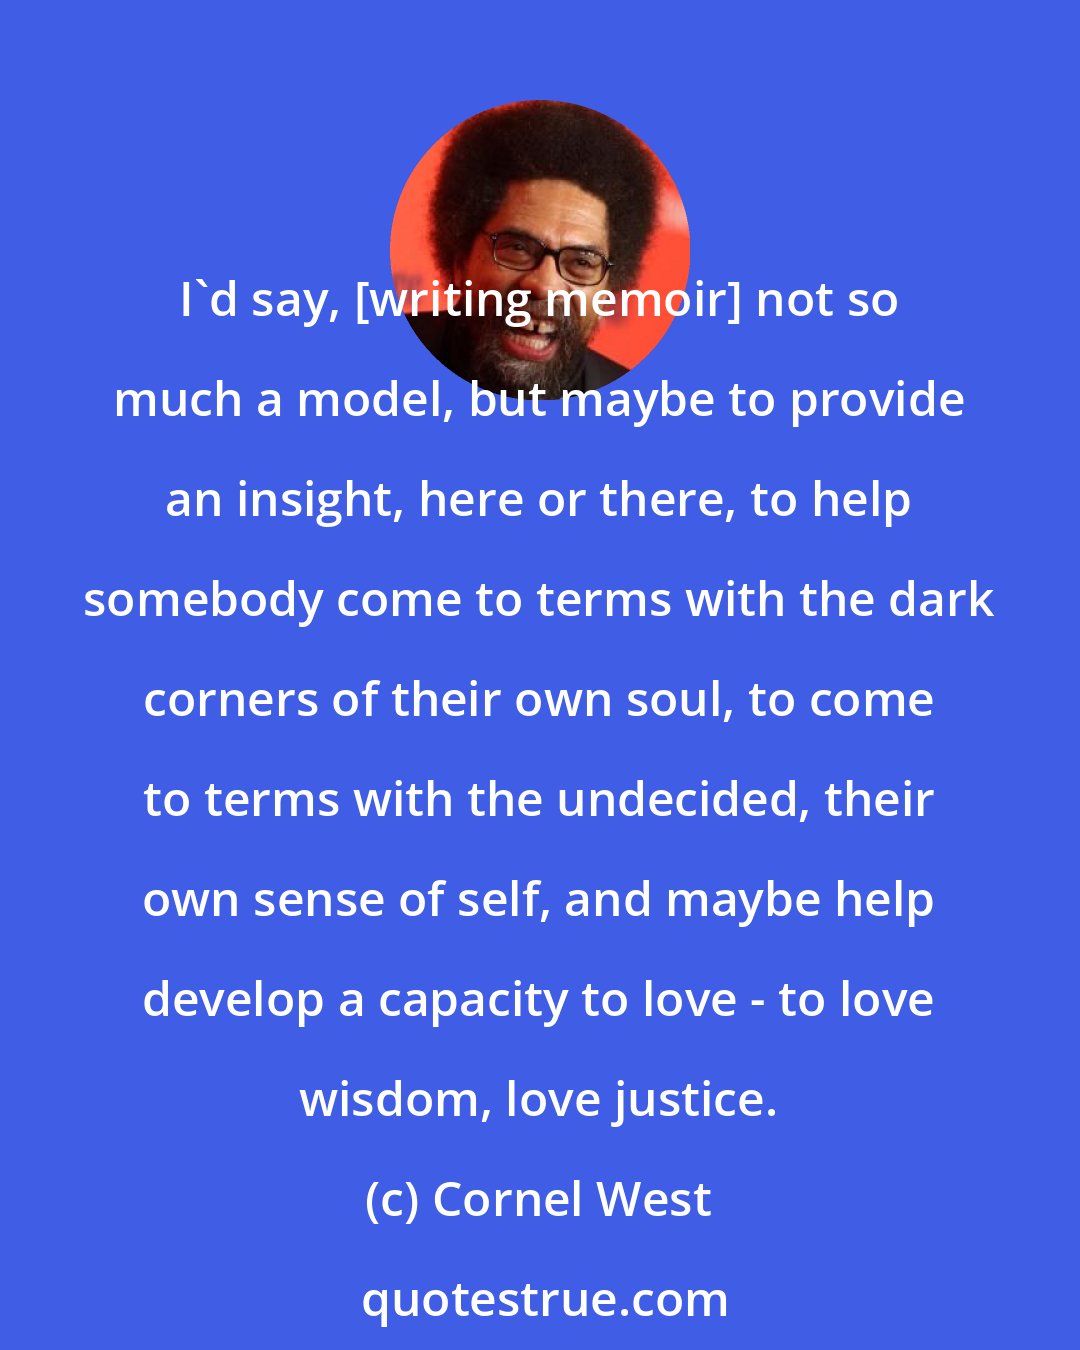 Cornel West: I'd say, [writing memoir] not so much a model, but maybe to provide an insight, here or there, to help somebody come to terms with the dark corners of their own soul, to come to terms with the undecided, their own sense of self, and maybe help develop a capacity to love - to love wisdom, love justice.